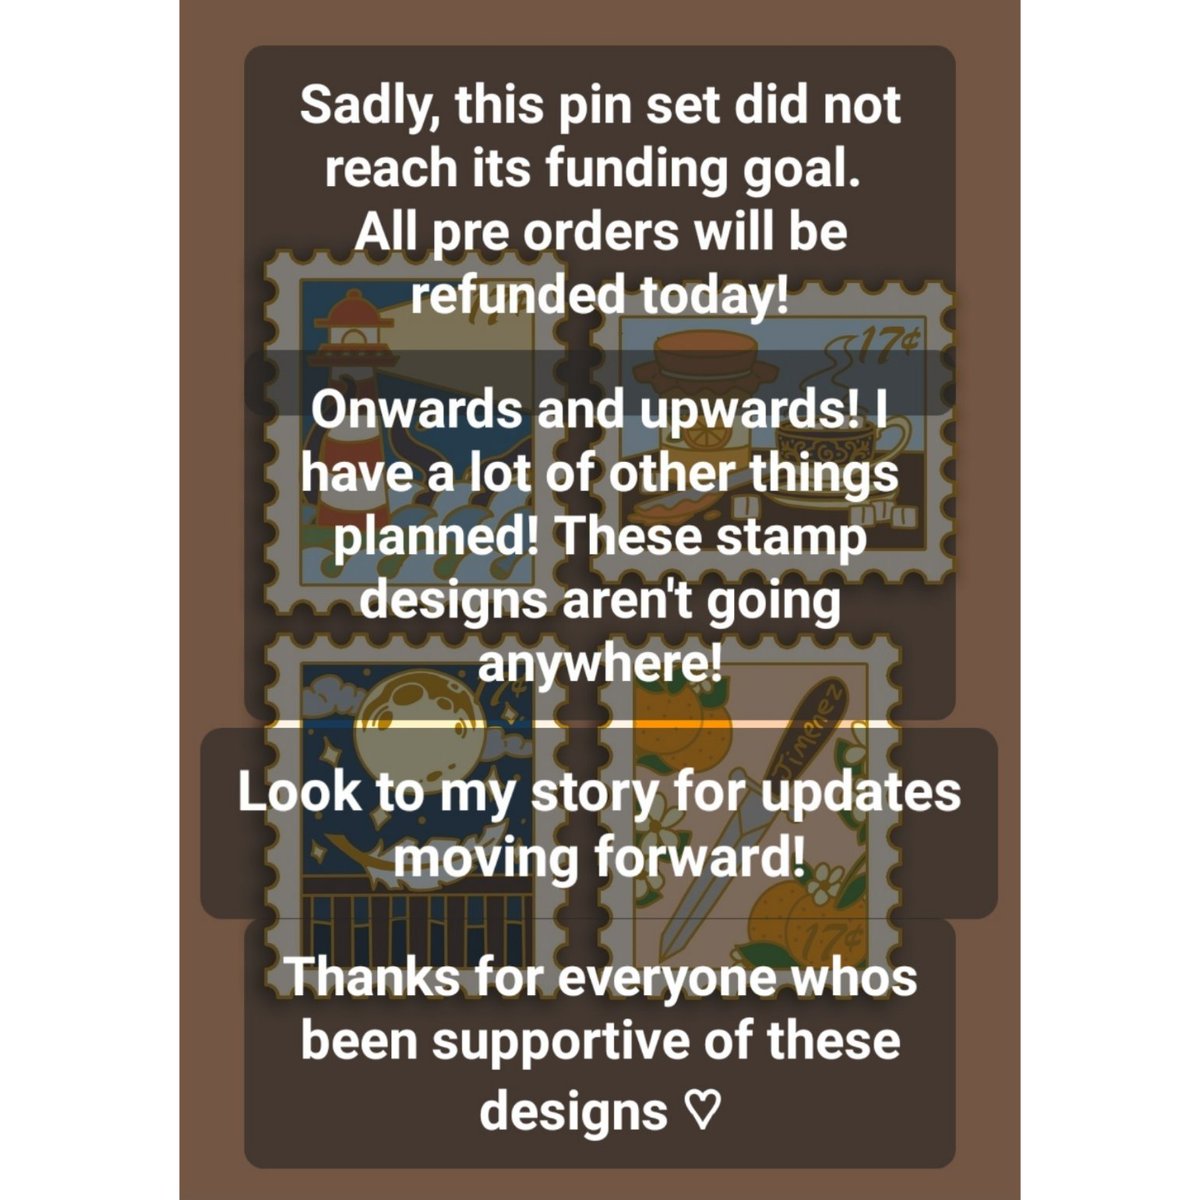 On to better things! Thank you all for the support an look to my story for updates or to ask questions!
---
#ourflagmeansdeathfanart #enamelpins
#enamelpin #pinpreorder  #ourflagmeansdeath #stedexed #stedebonnet #edwardteach #blackbeard #thekraken #OFMD2